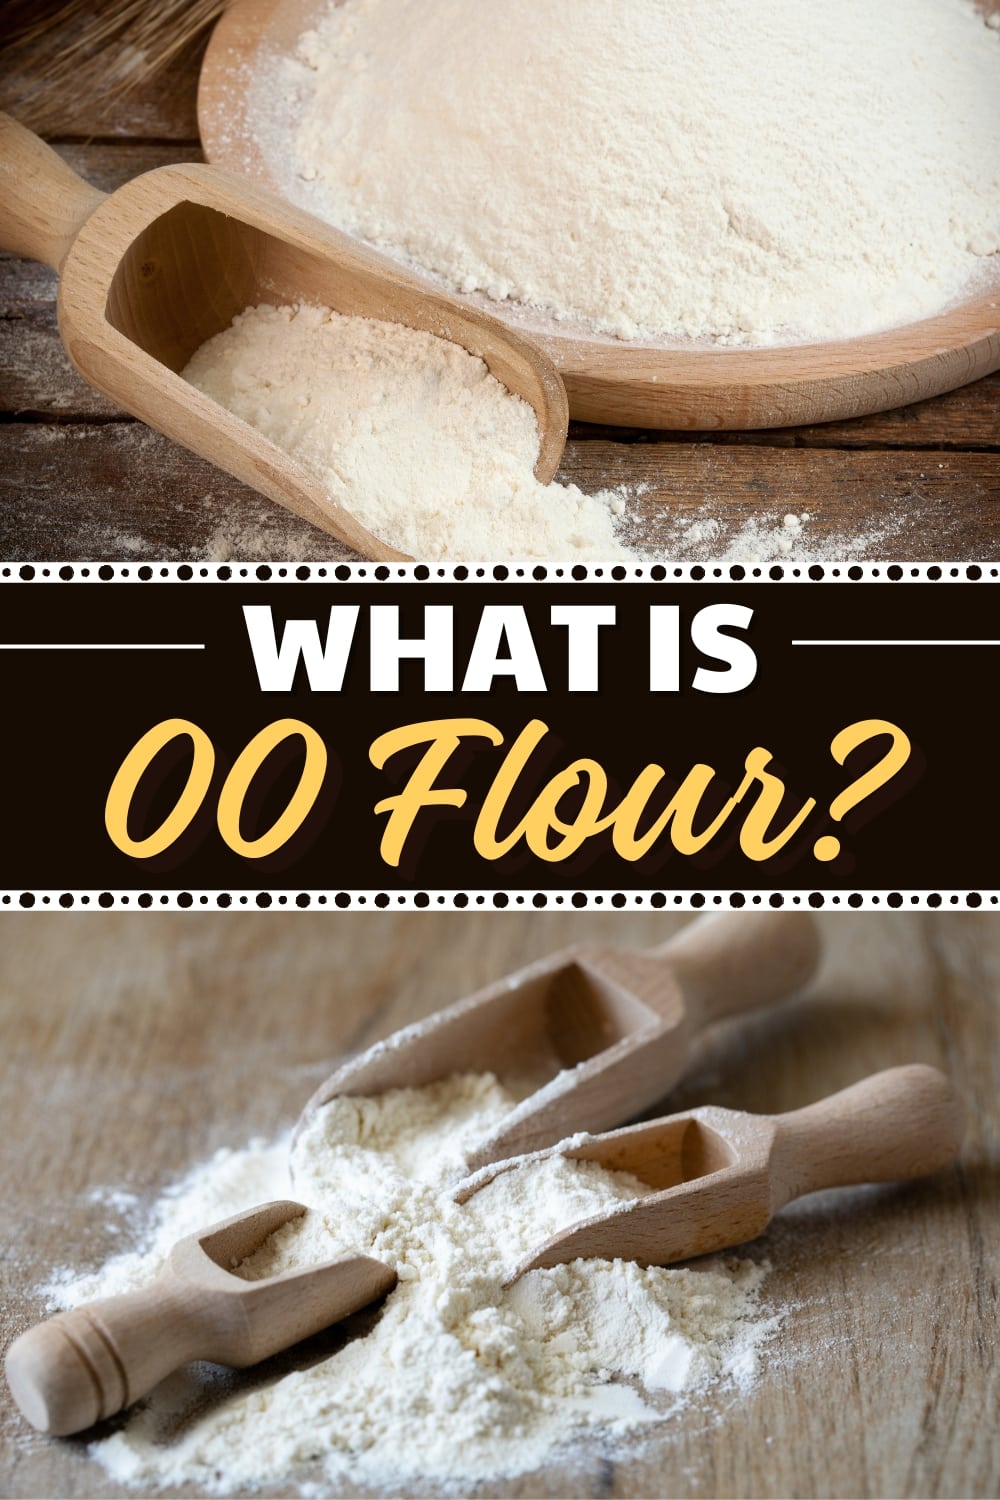 What Is 00 Flour?